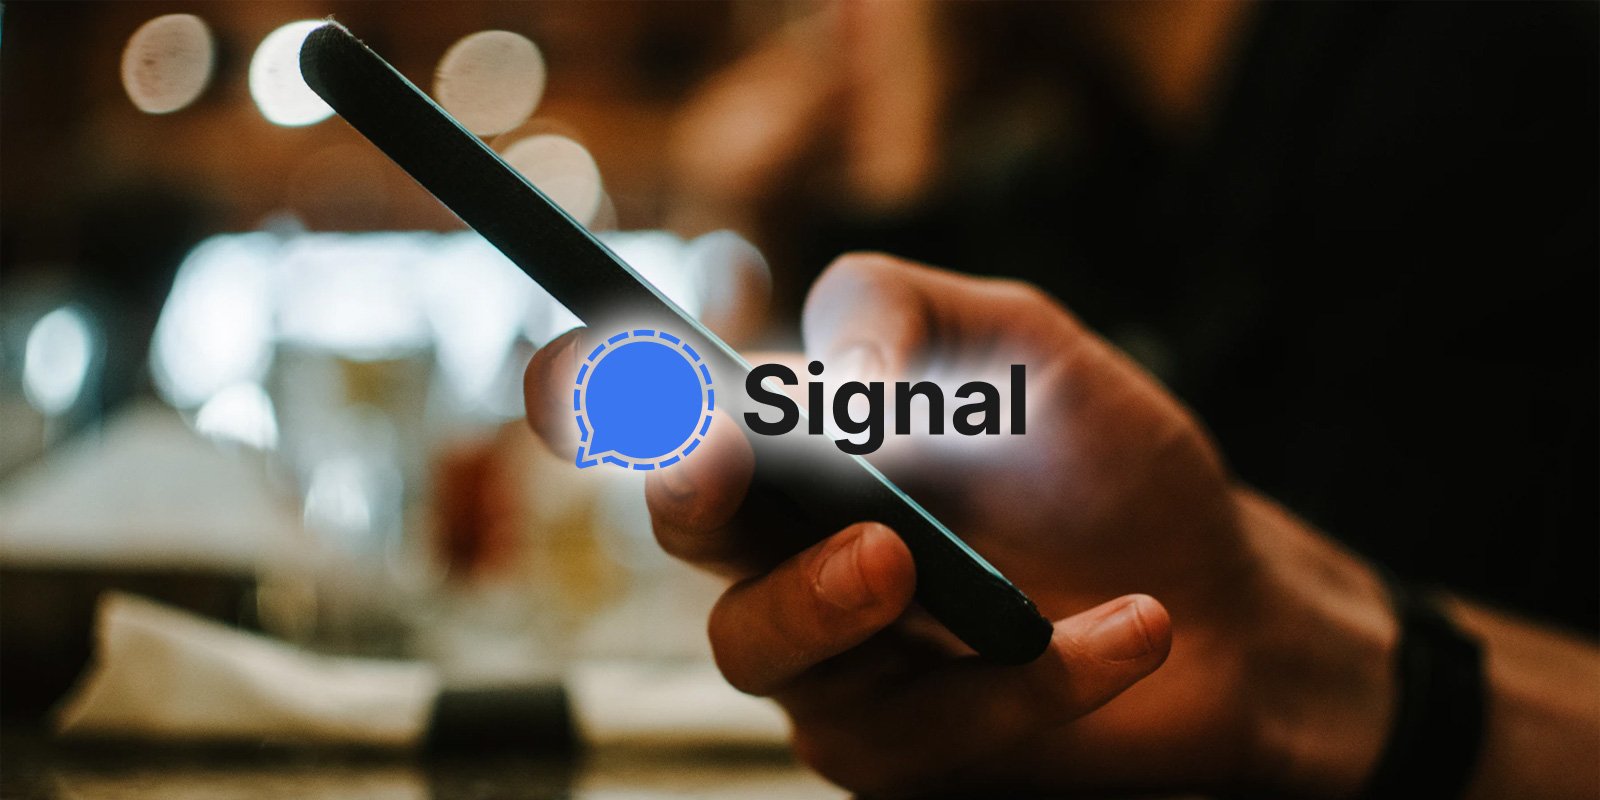 Person using signal